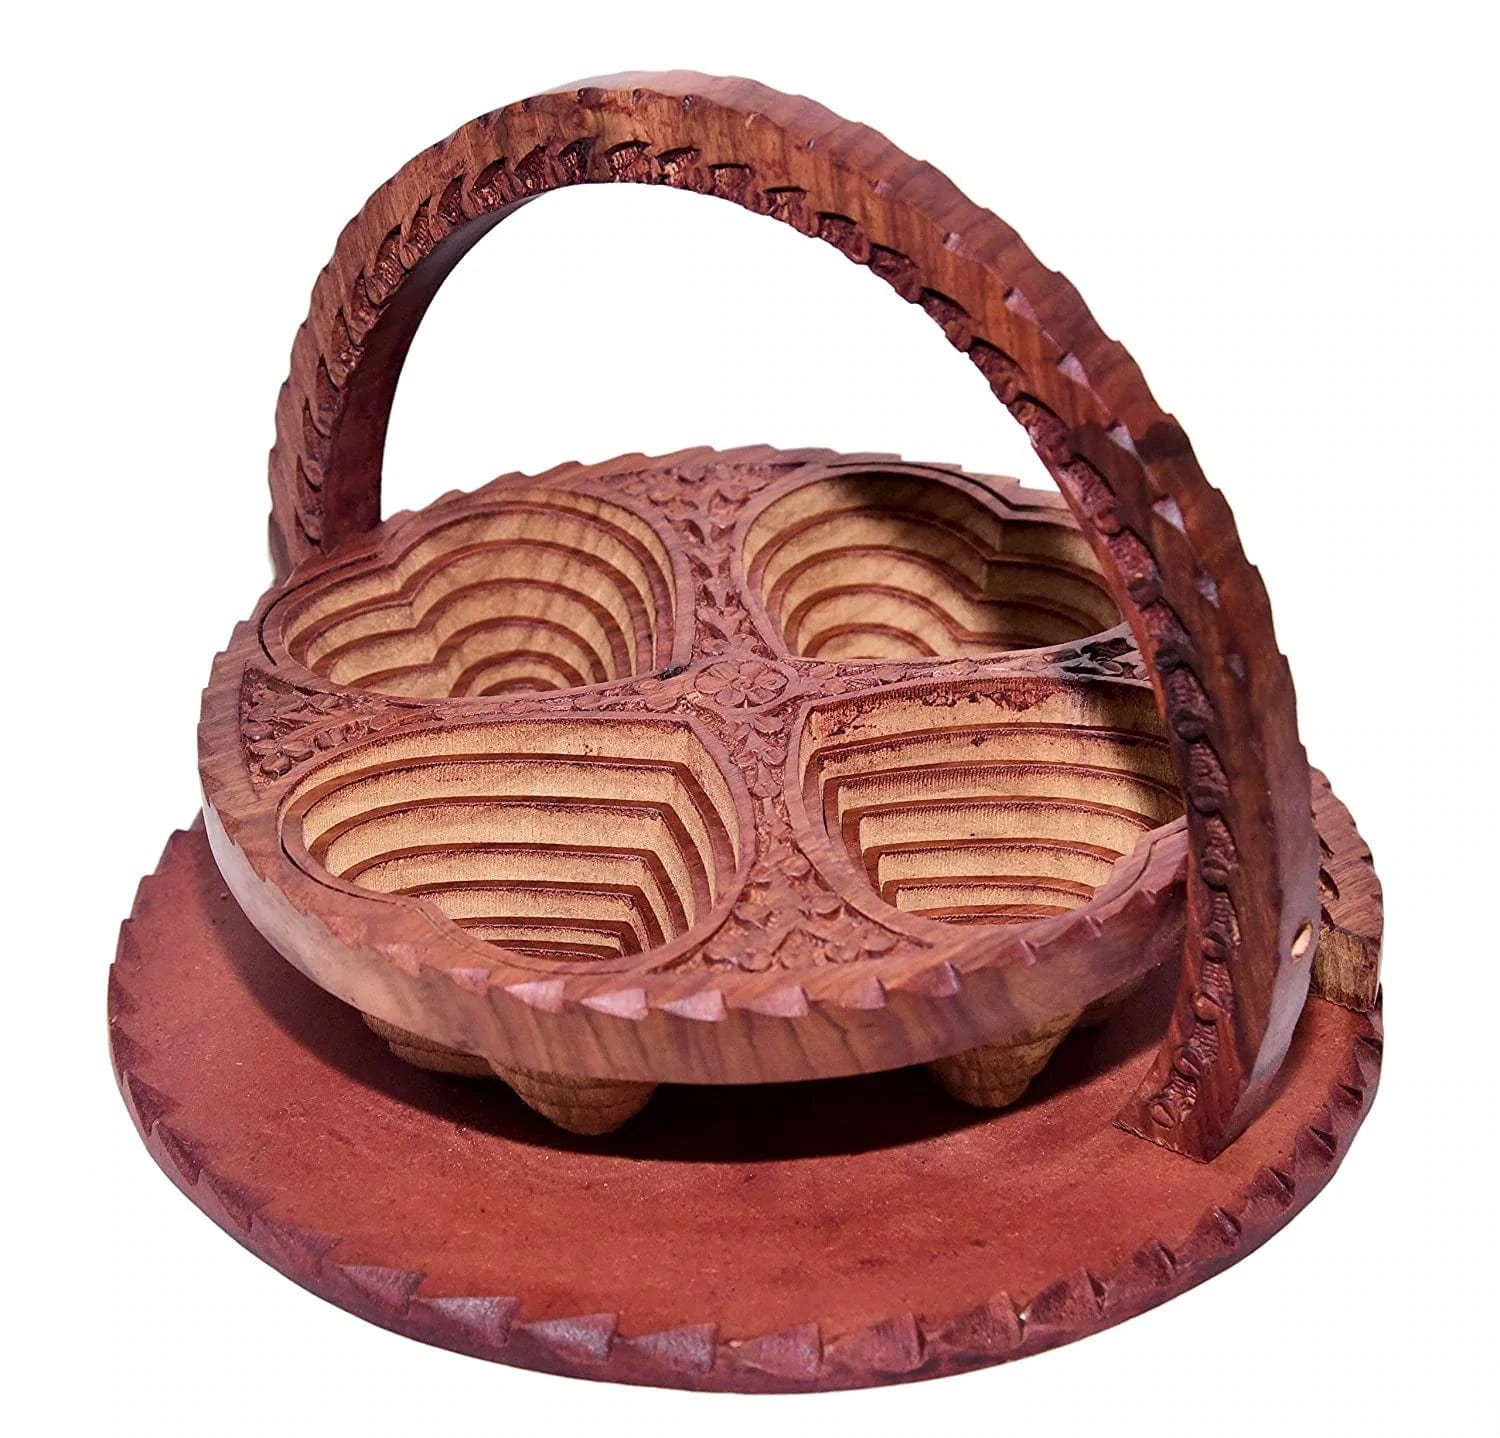 HANDCRAFTED WOODEN BEAUTIFUL DRY FRUIT FOLDABLE BASKET 4 PART